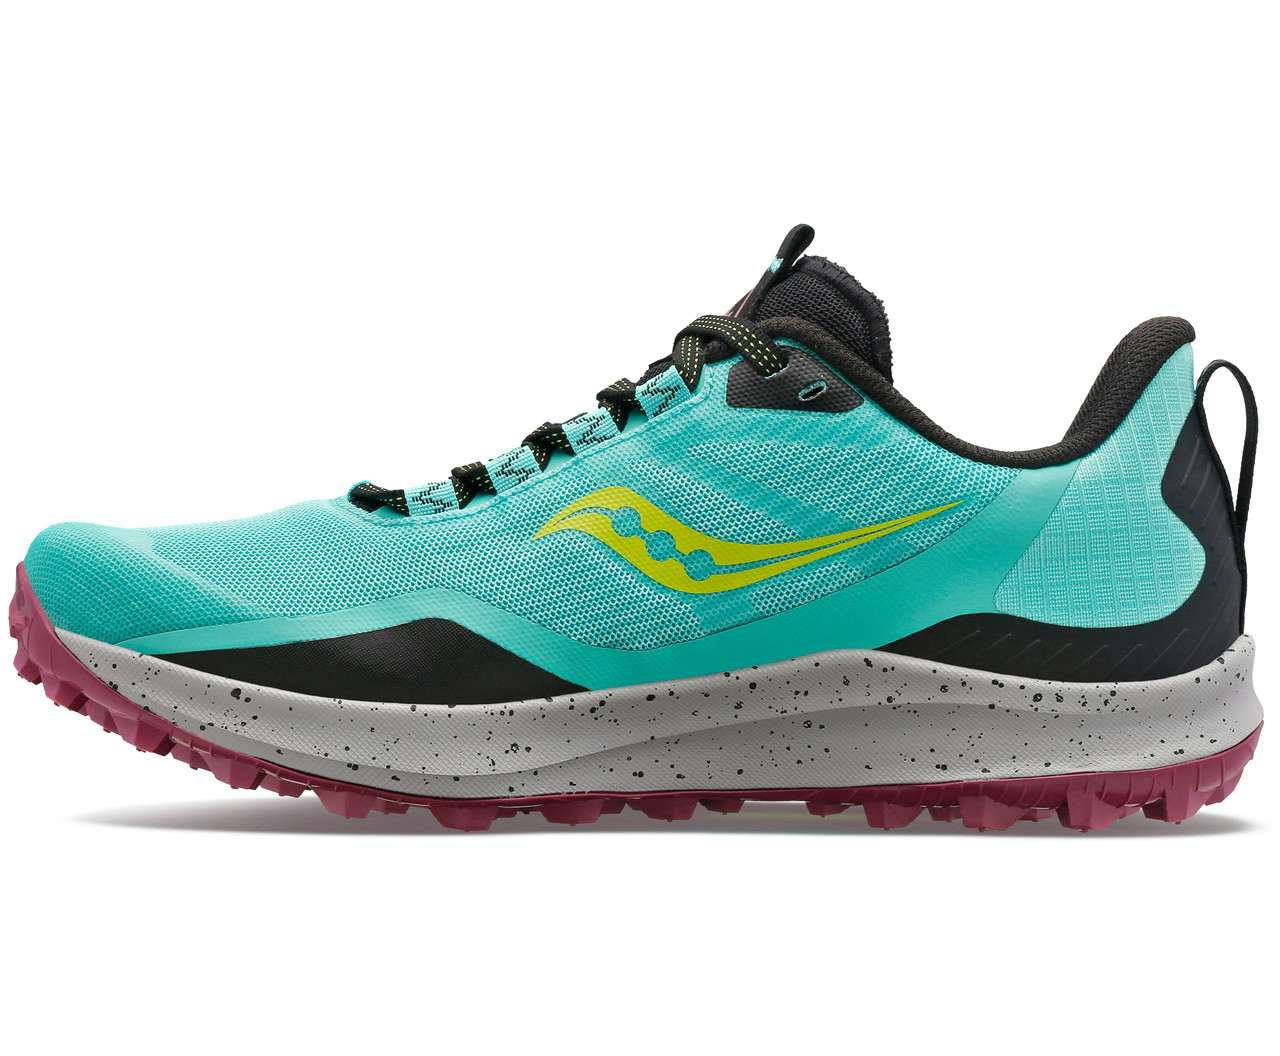 Peregrine 12 Trail Running Shoes Coolmint/Acid